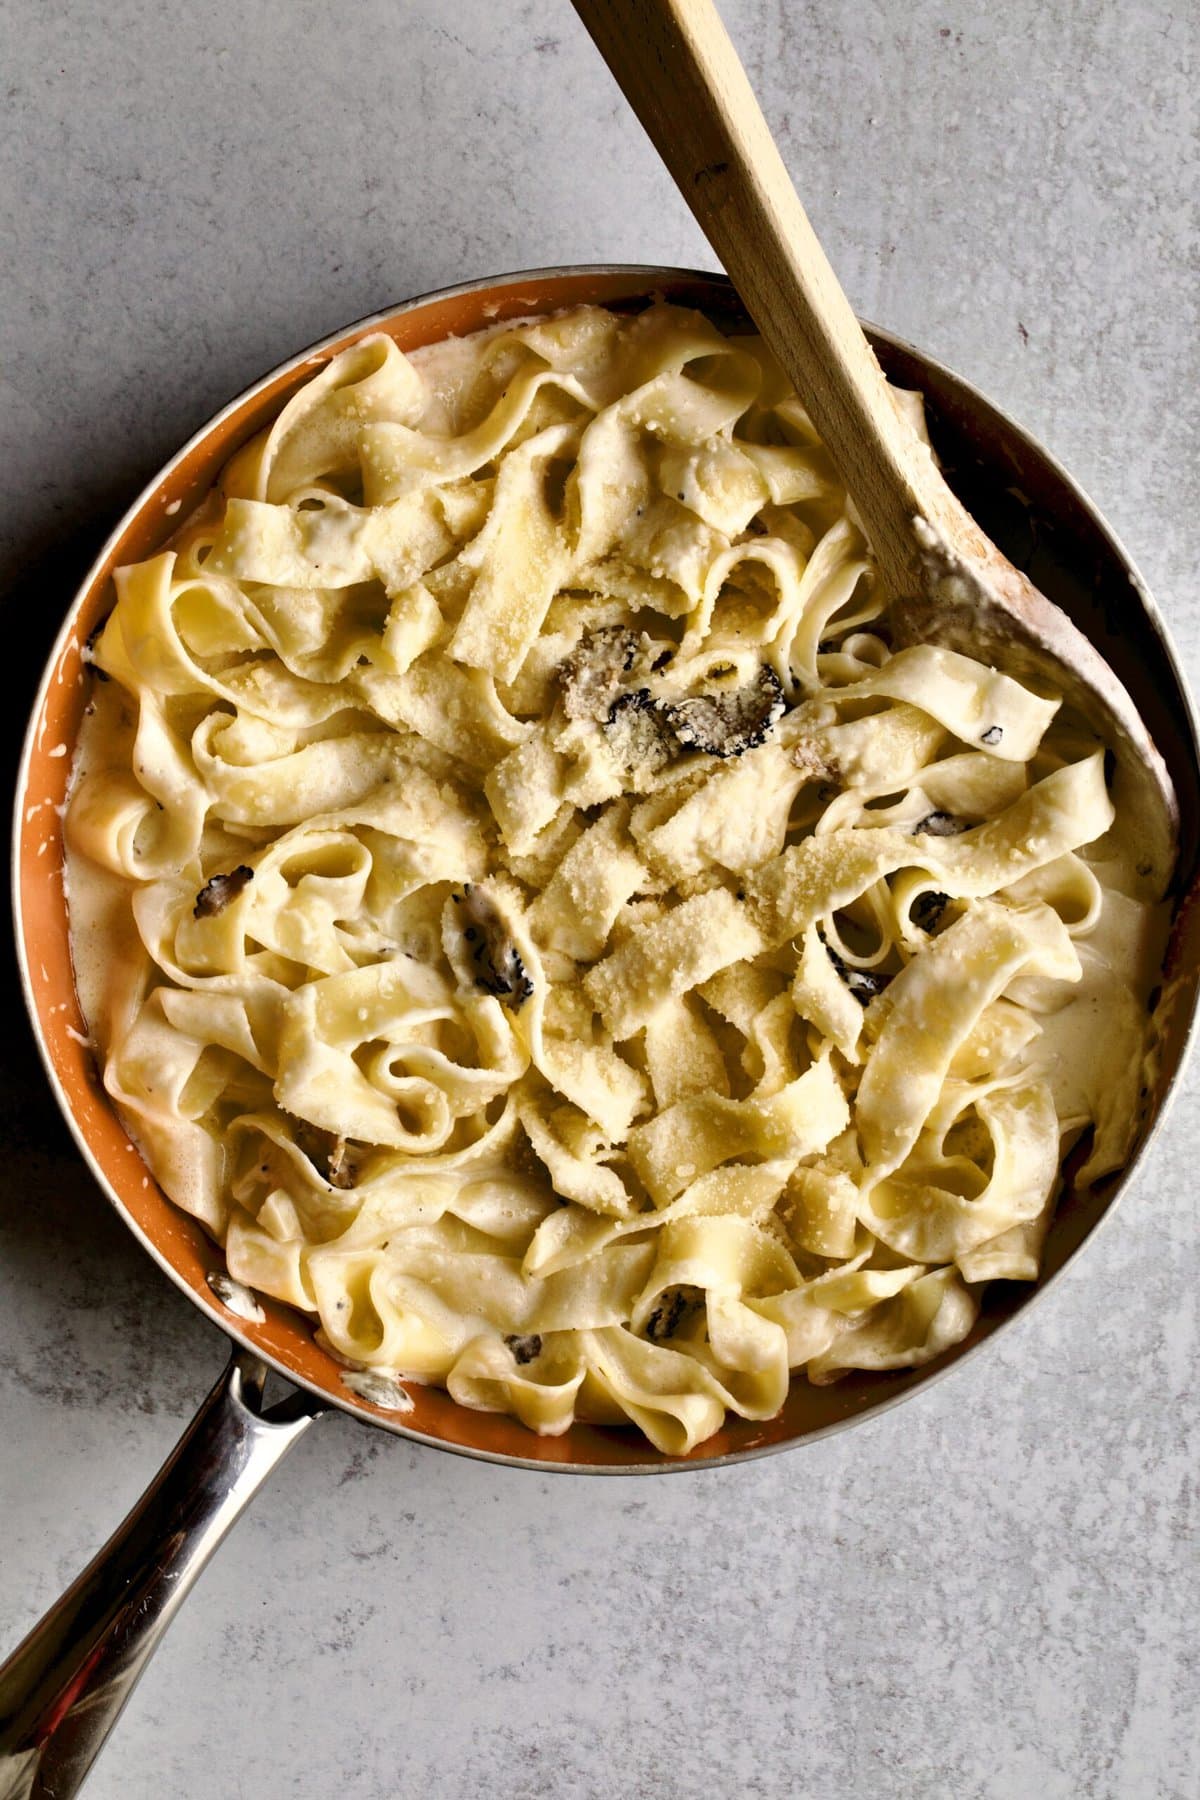 instructions for black truffle cream sauce: adding cooked pasta to prepared sauce.